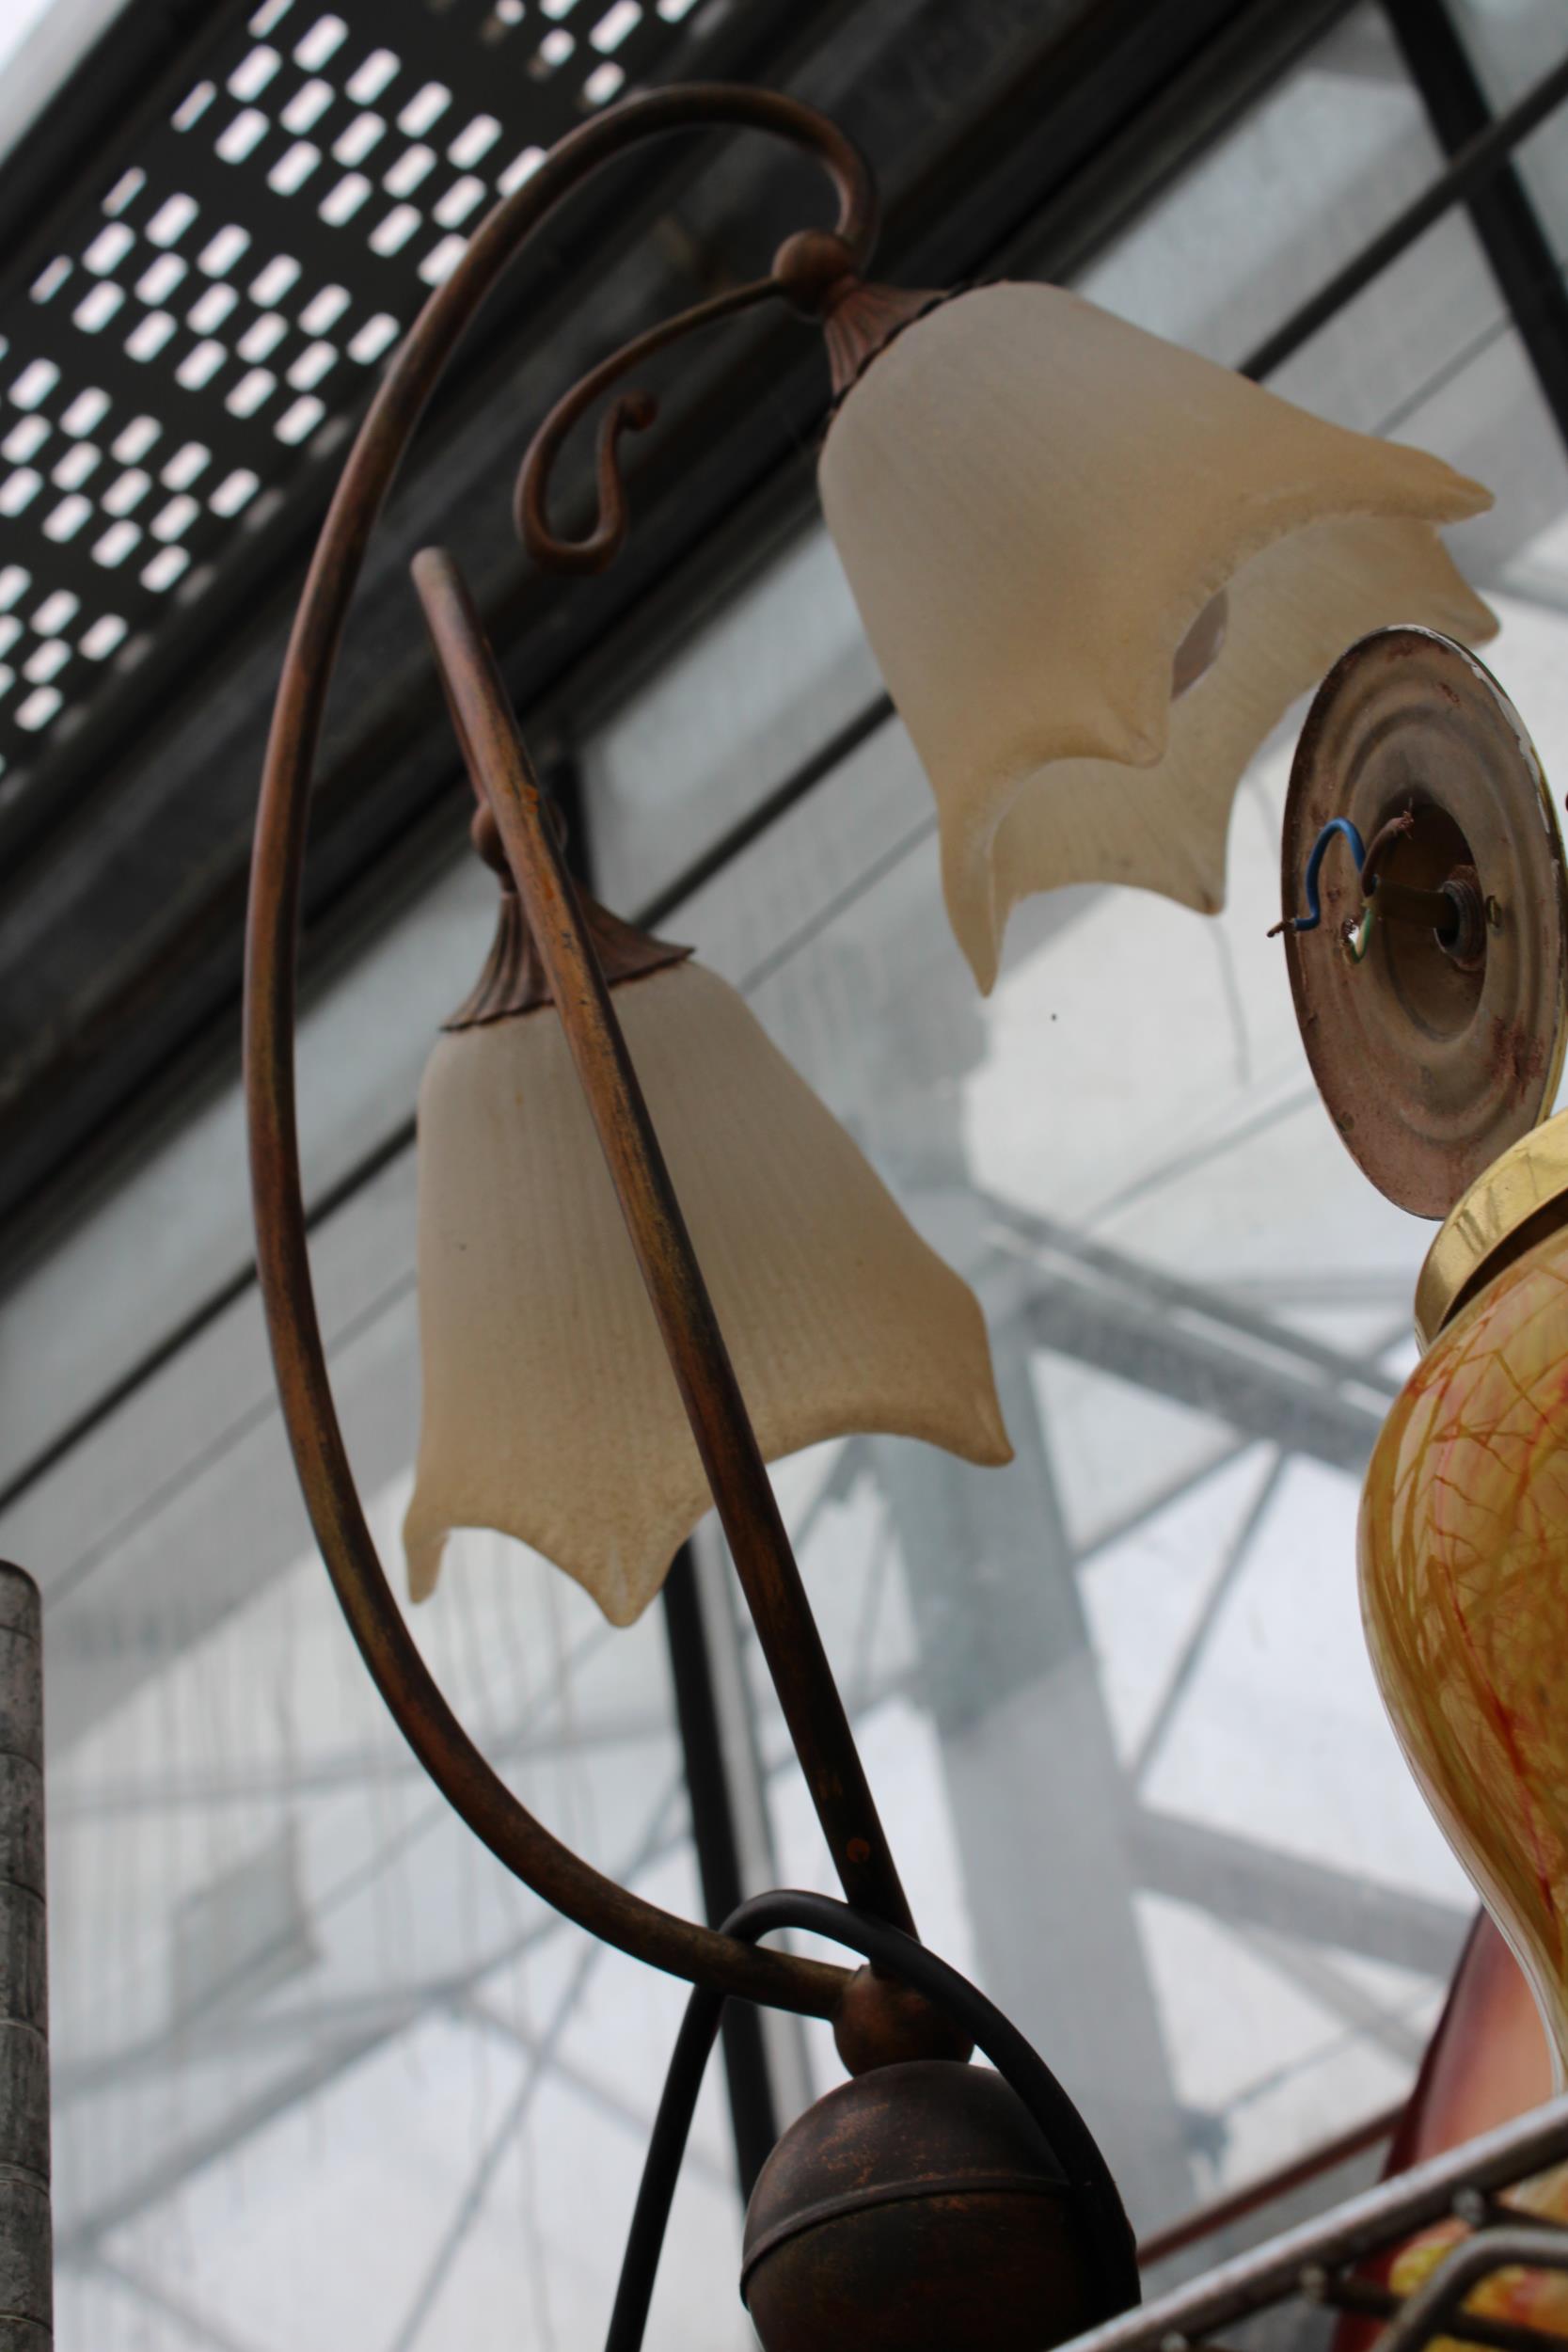 A DECORATIVE TABLE LAMP AND A CEILING LIGHT FITTING WITH VIVID GLASS SHADE - Image 2 of 2